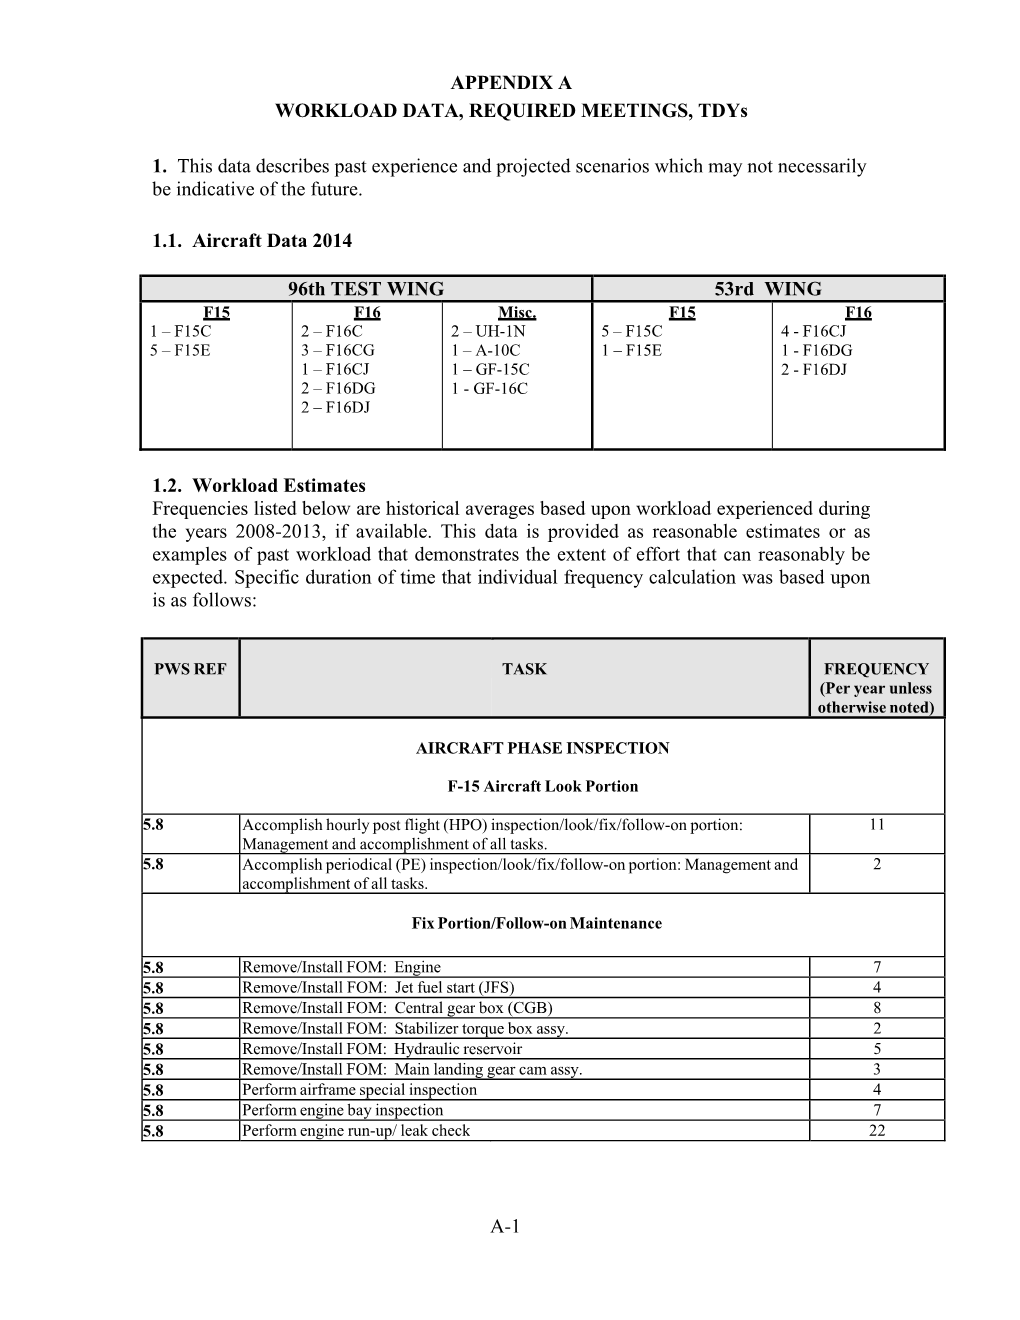 A-1 Appendix a Workload Data, Required